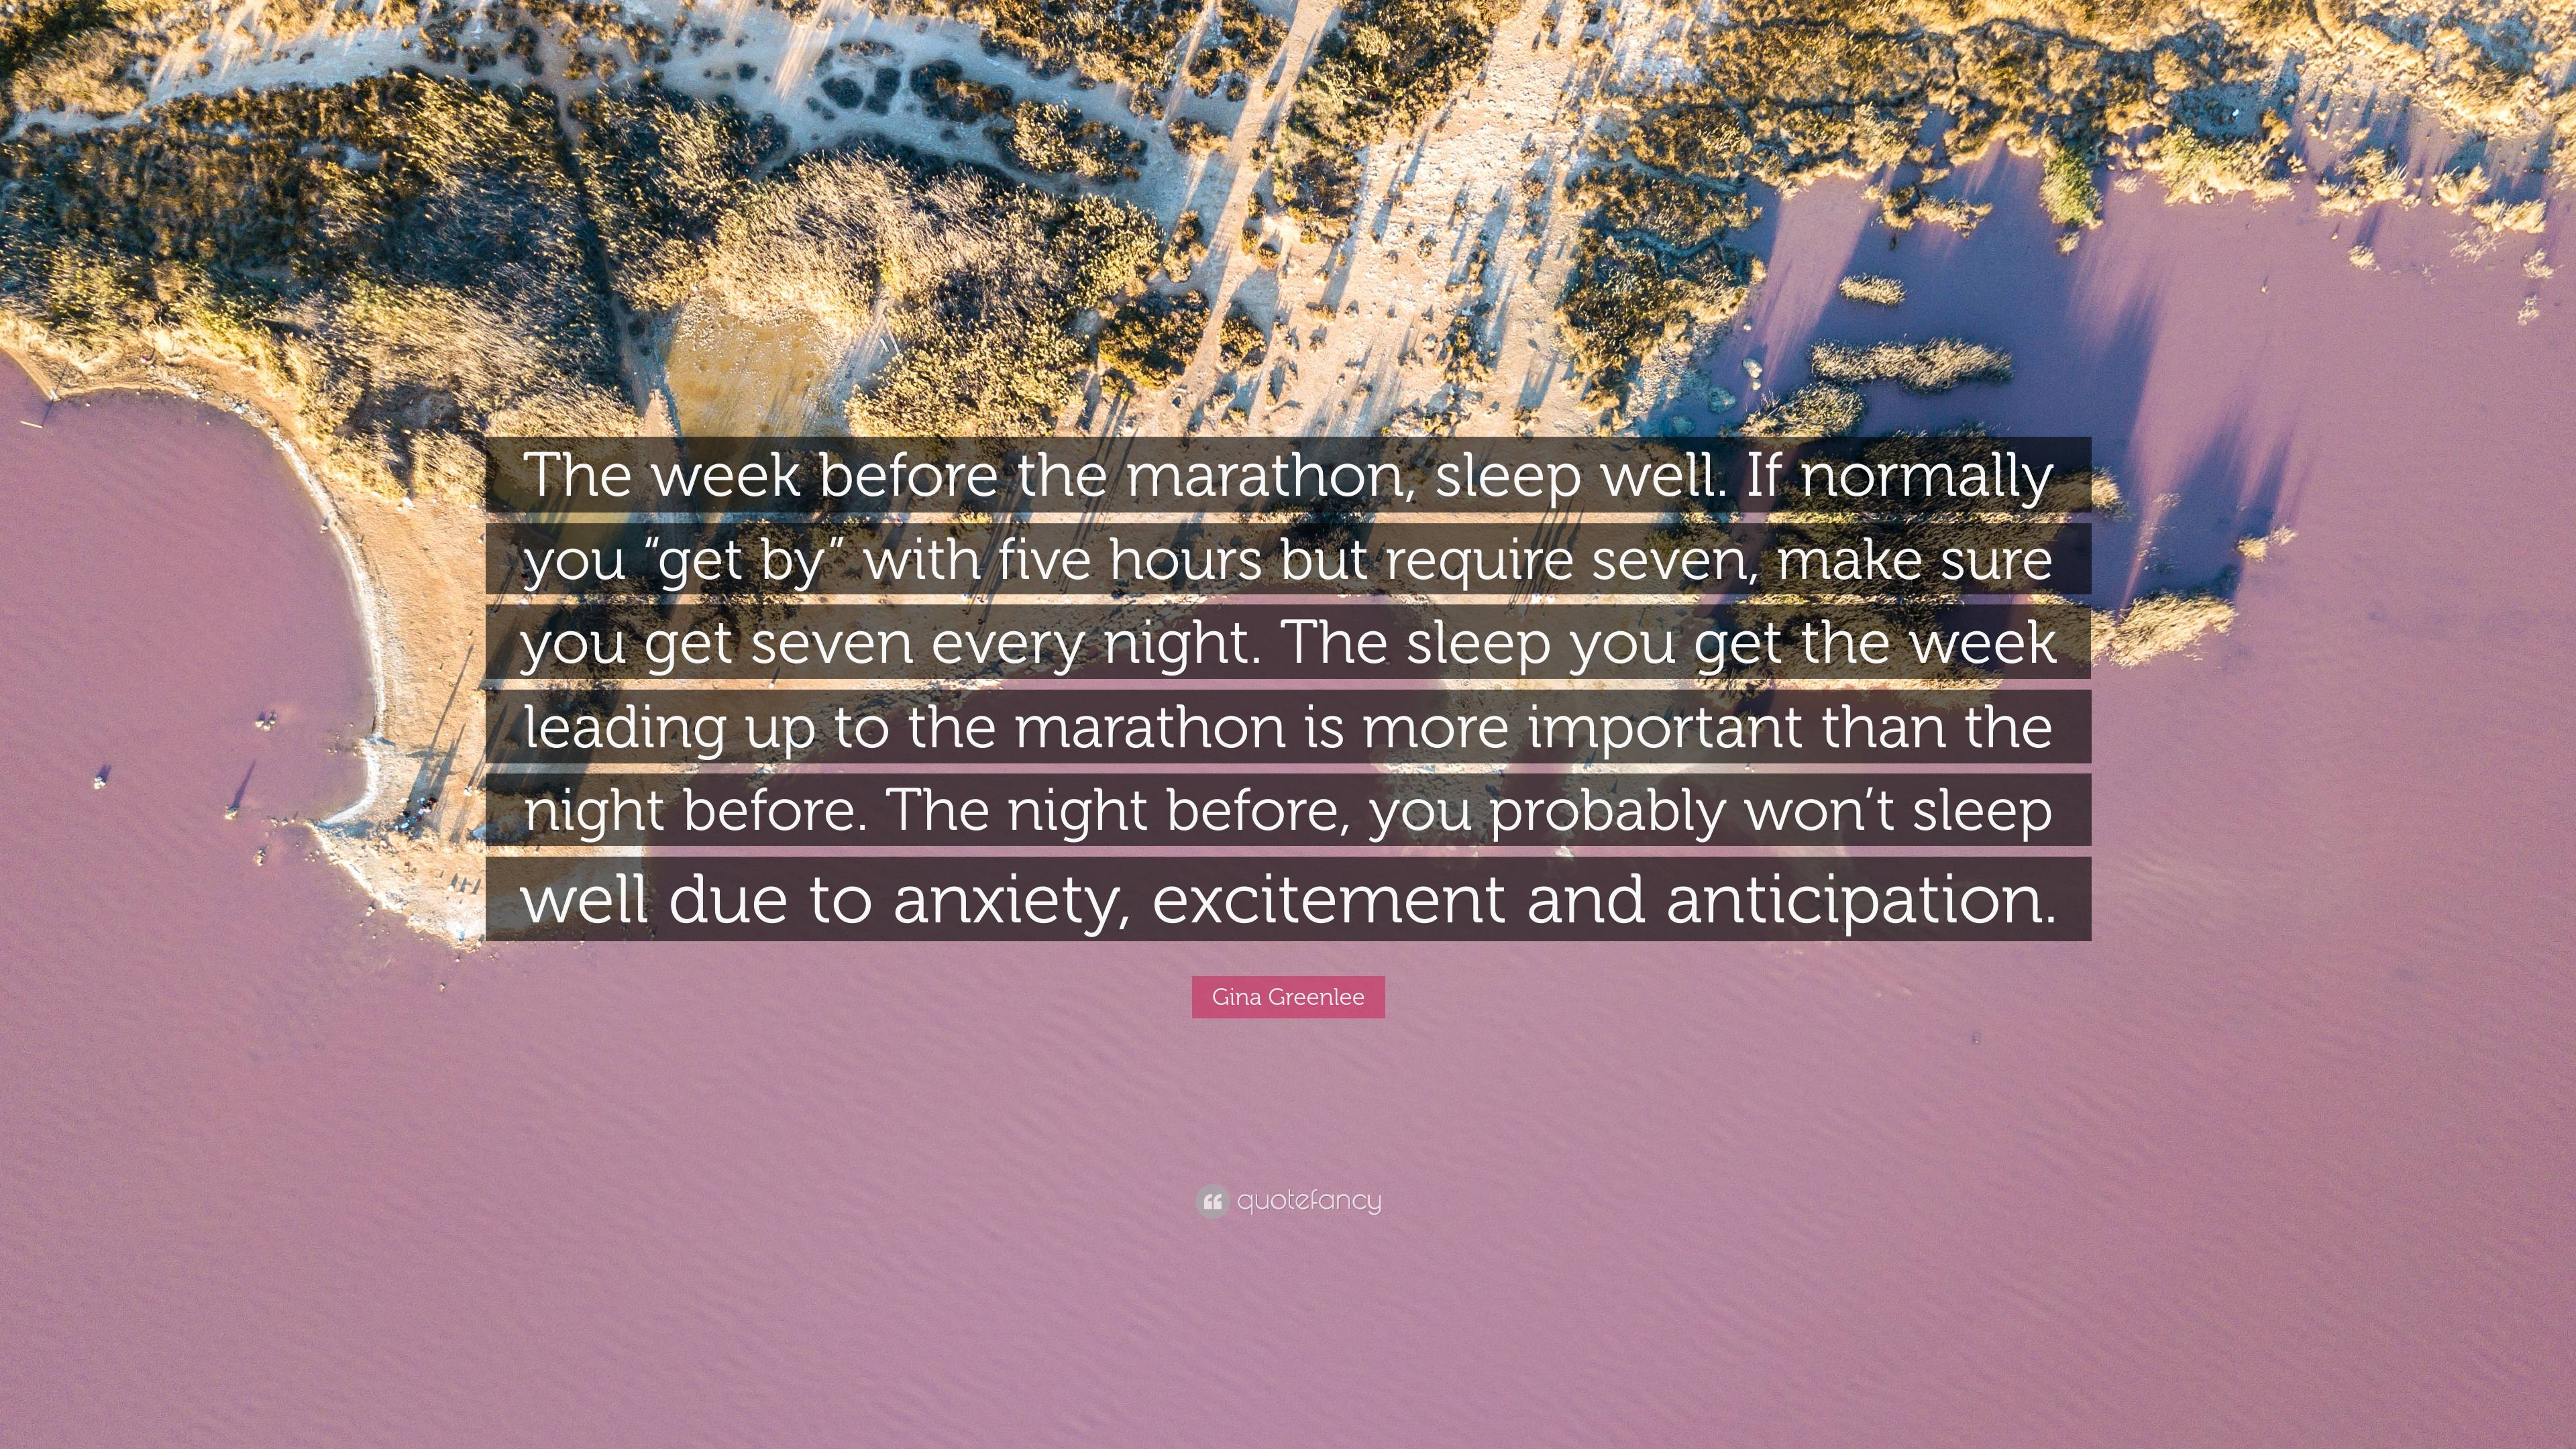 Gina Greenlee Quote: “The week before the marathon, sleep well. If normally you “get by” with five hours but require seven, make sure you get .” (2 wallpaper)